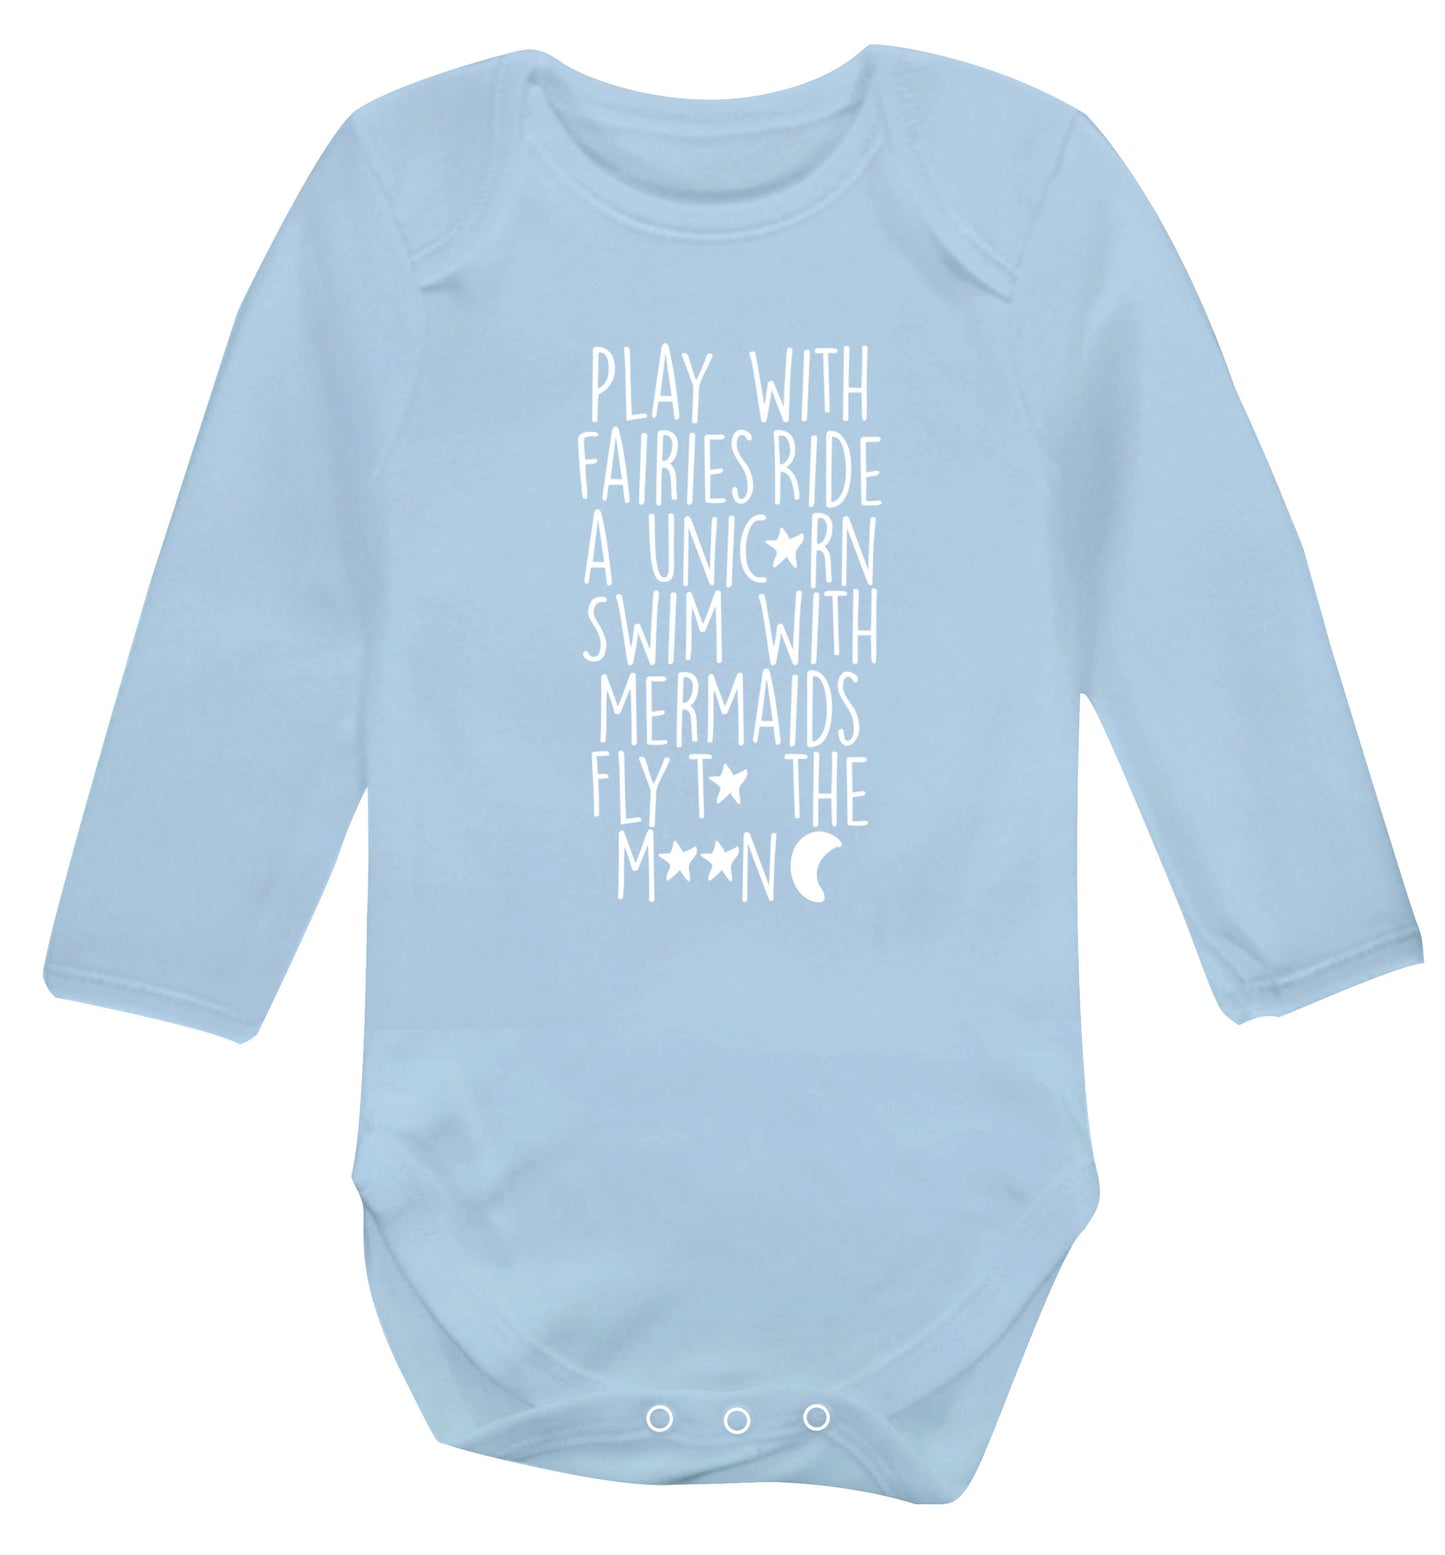 Play with fairies ride a unicorn swim with mermaids fly to the moon Baby Vest long sleeved pale blue 6-12 months